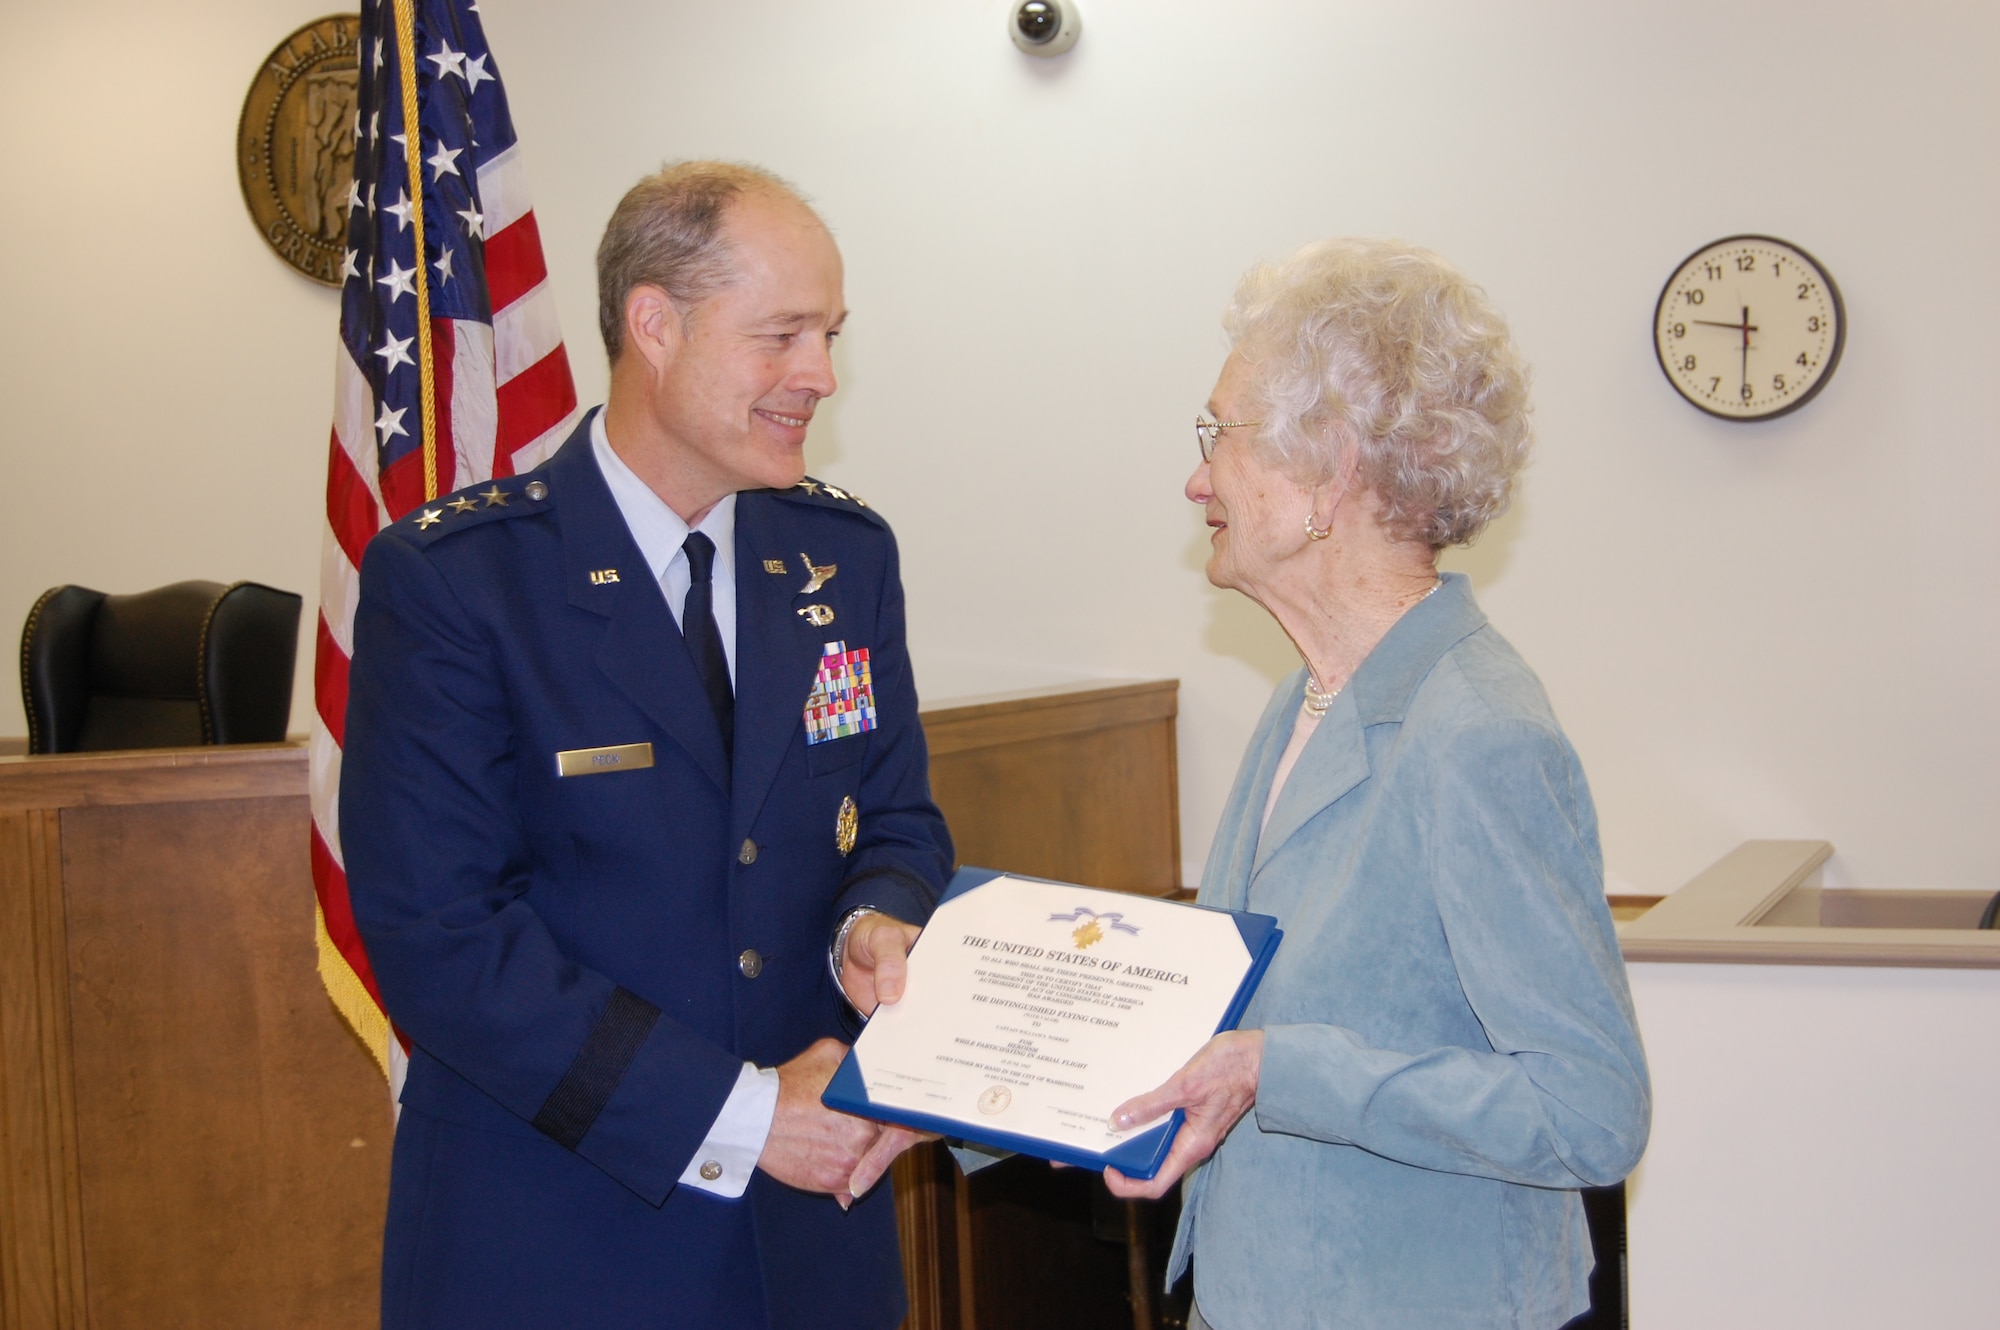 Lt. Gen. Allen Peck, Air University commander, presents Mrs. William (Doris) Norred with her late-husband's Distinguished Flying Cross with Valor on Monday. Capt. William Norred's military records were reviewed, and it was determined he earned the DFC on a combat mission during World War II. (Air Force photo by Carl Bergquist)